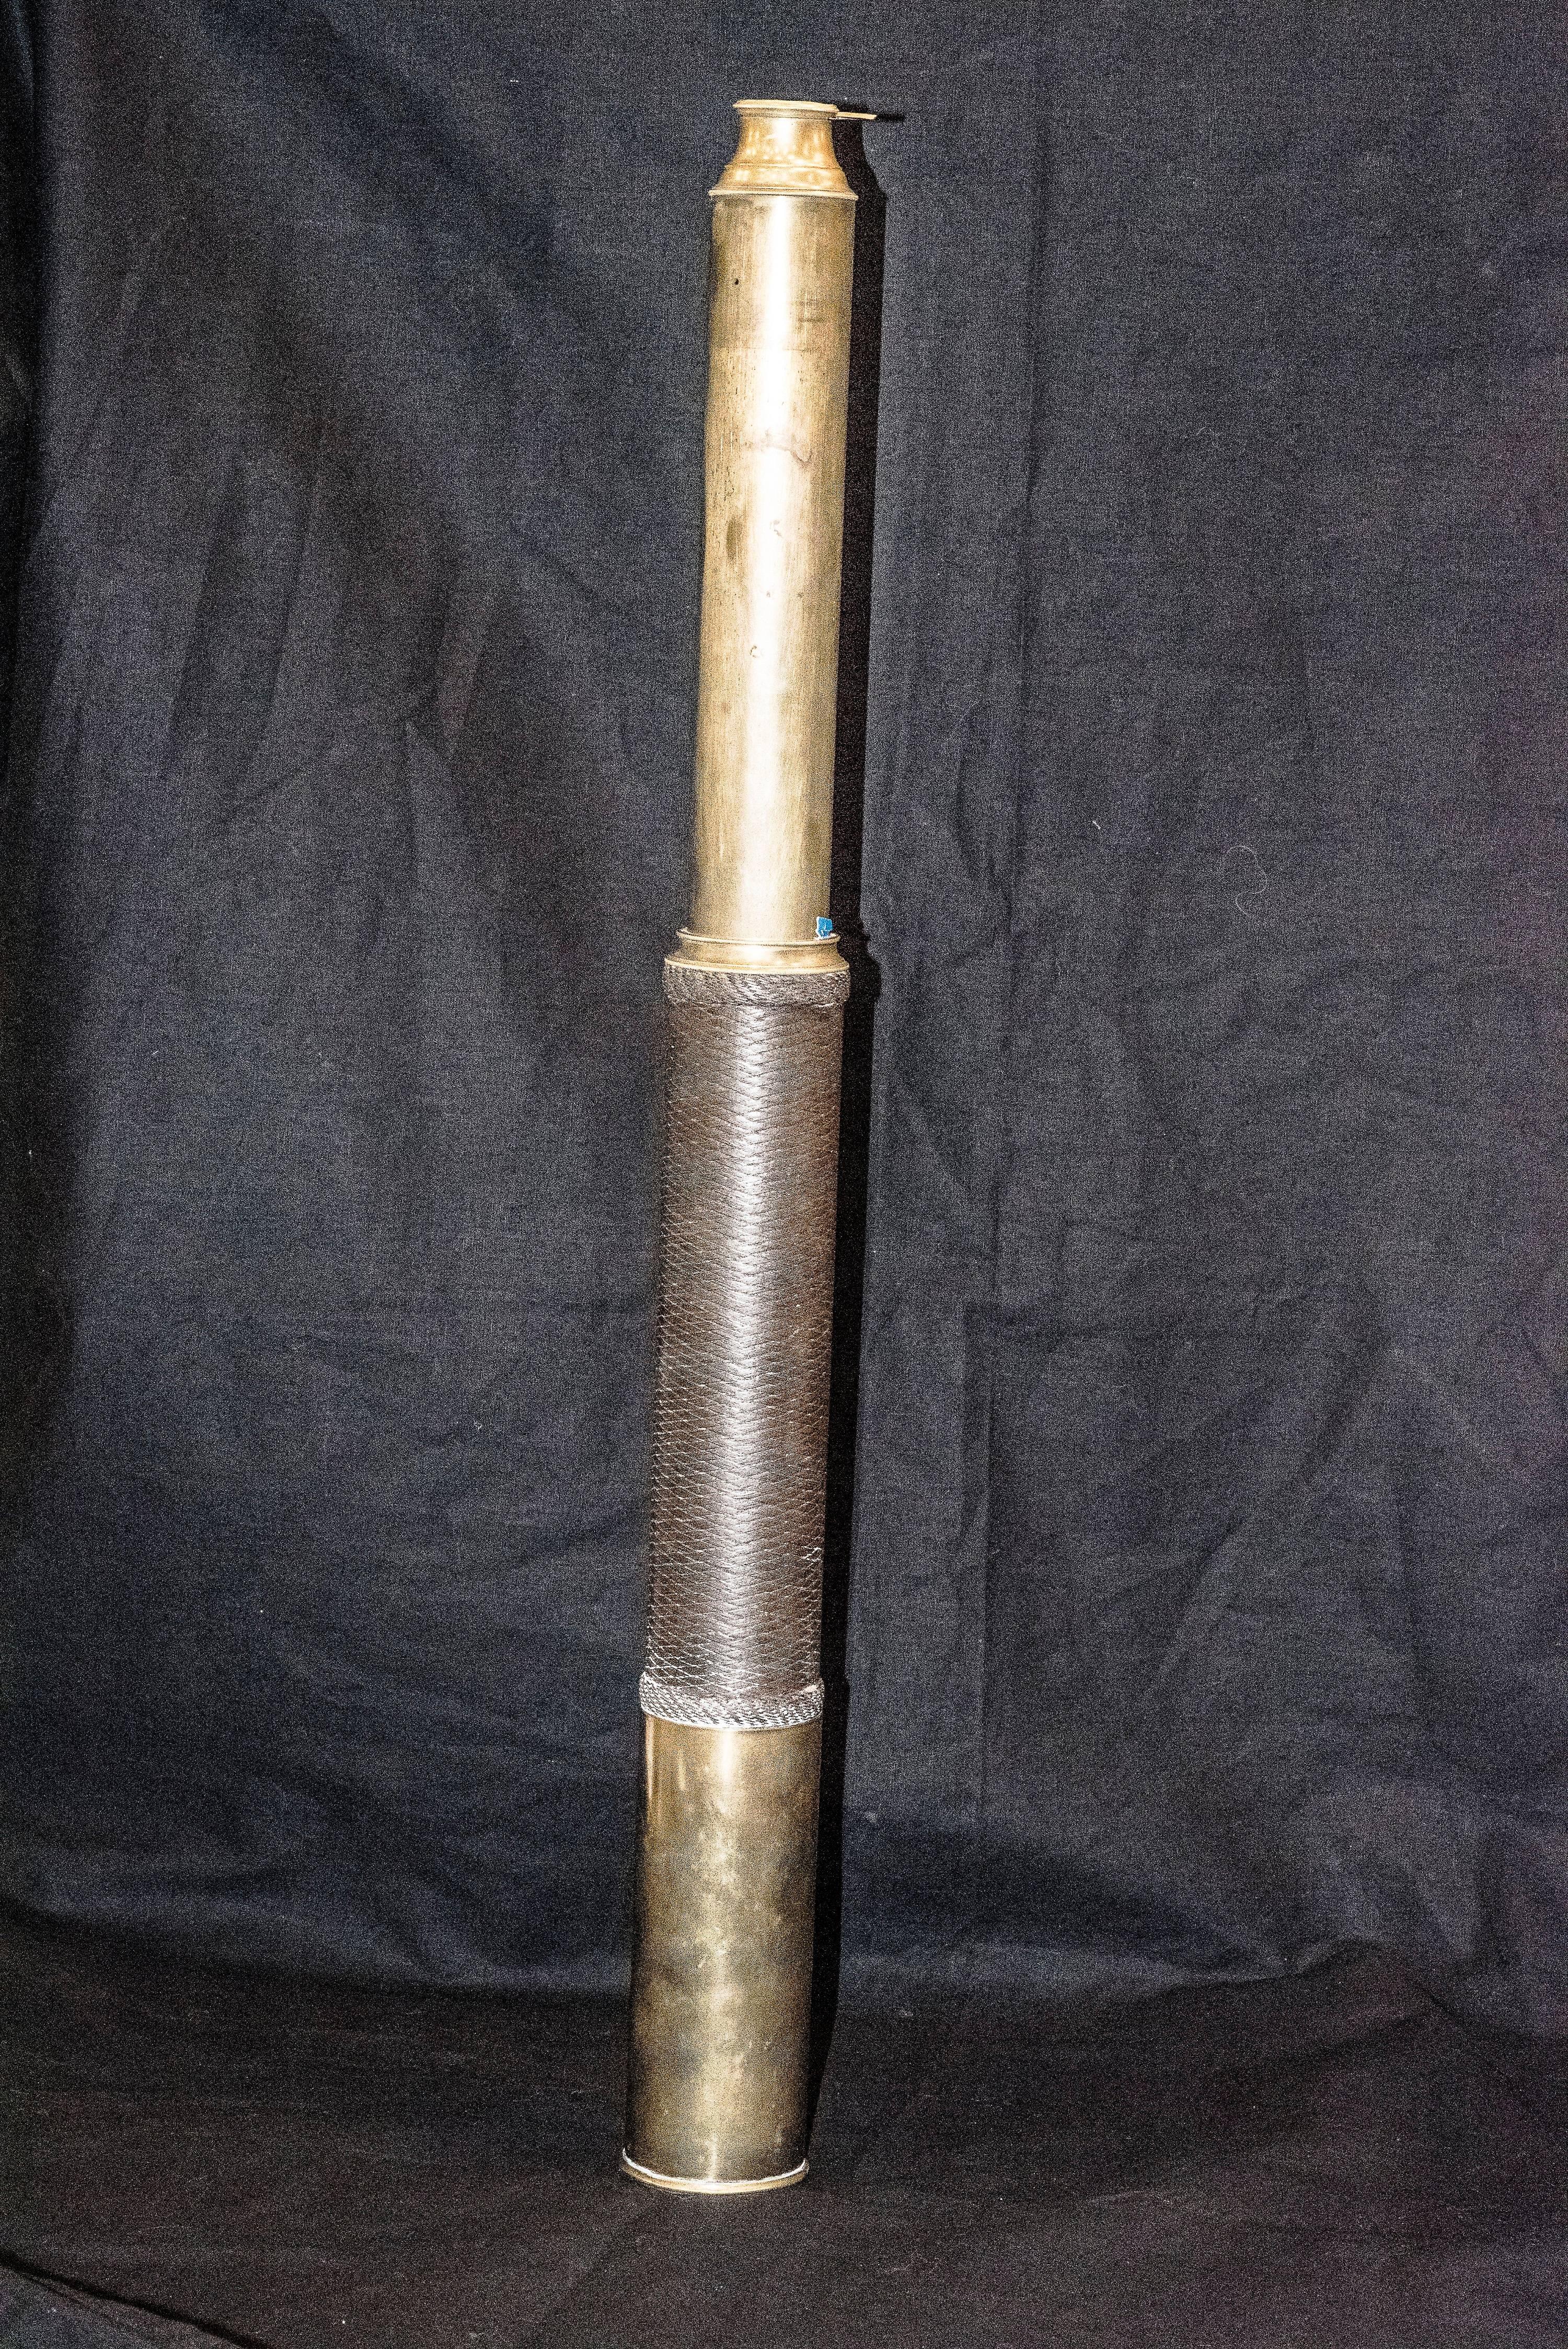 An extraordinary bronze English telescope. It is a marine telescope in a very good condition with leather in the middle. From England. Height 77 cm open and 40 cm closed.